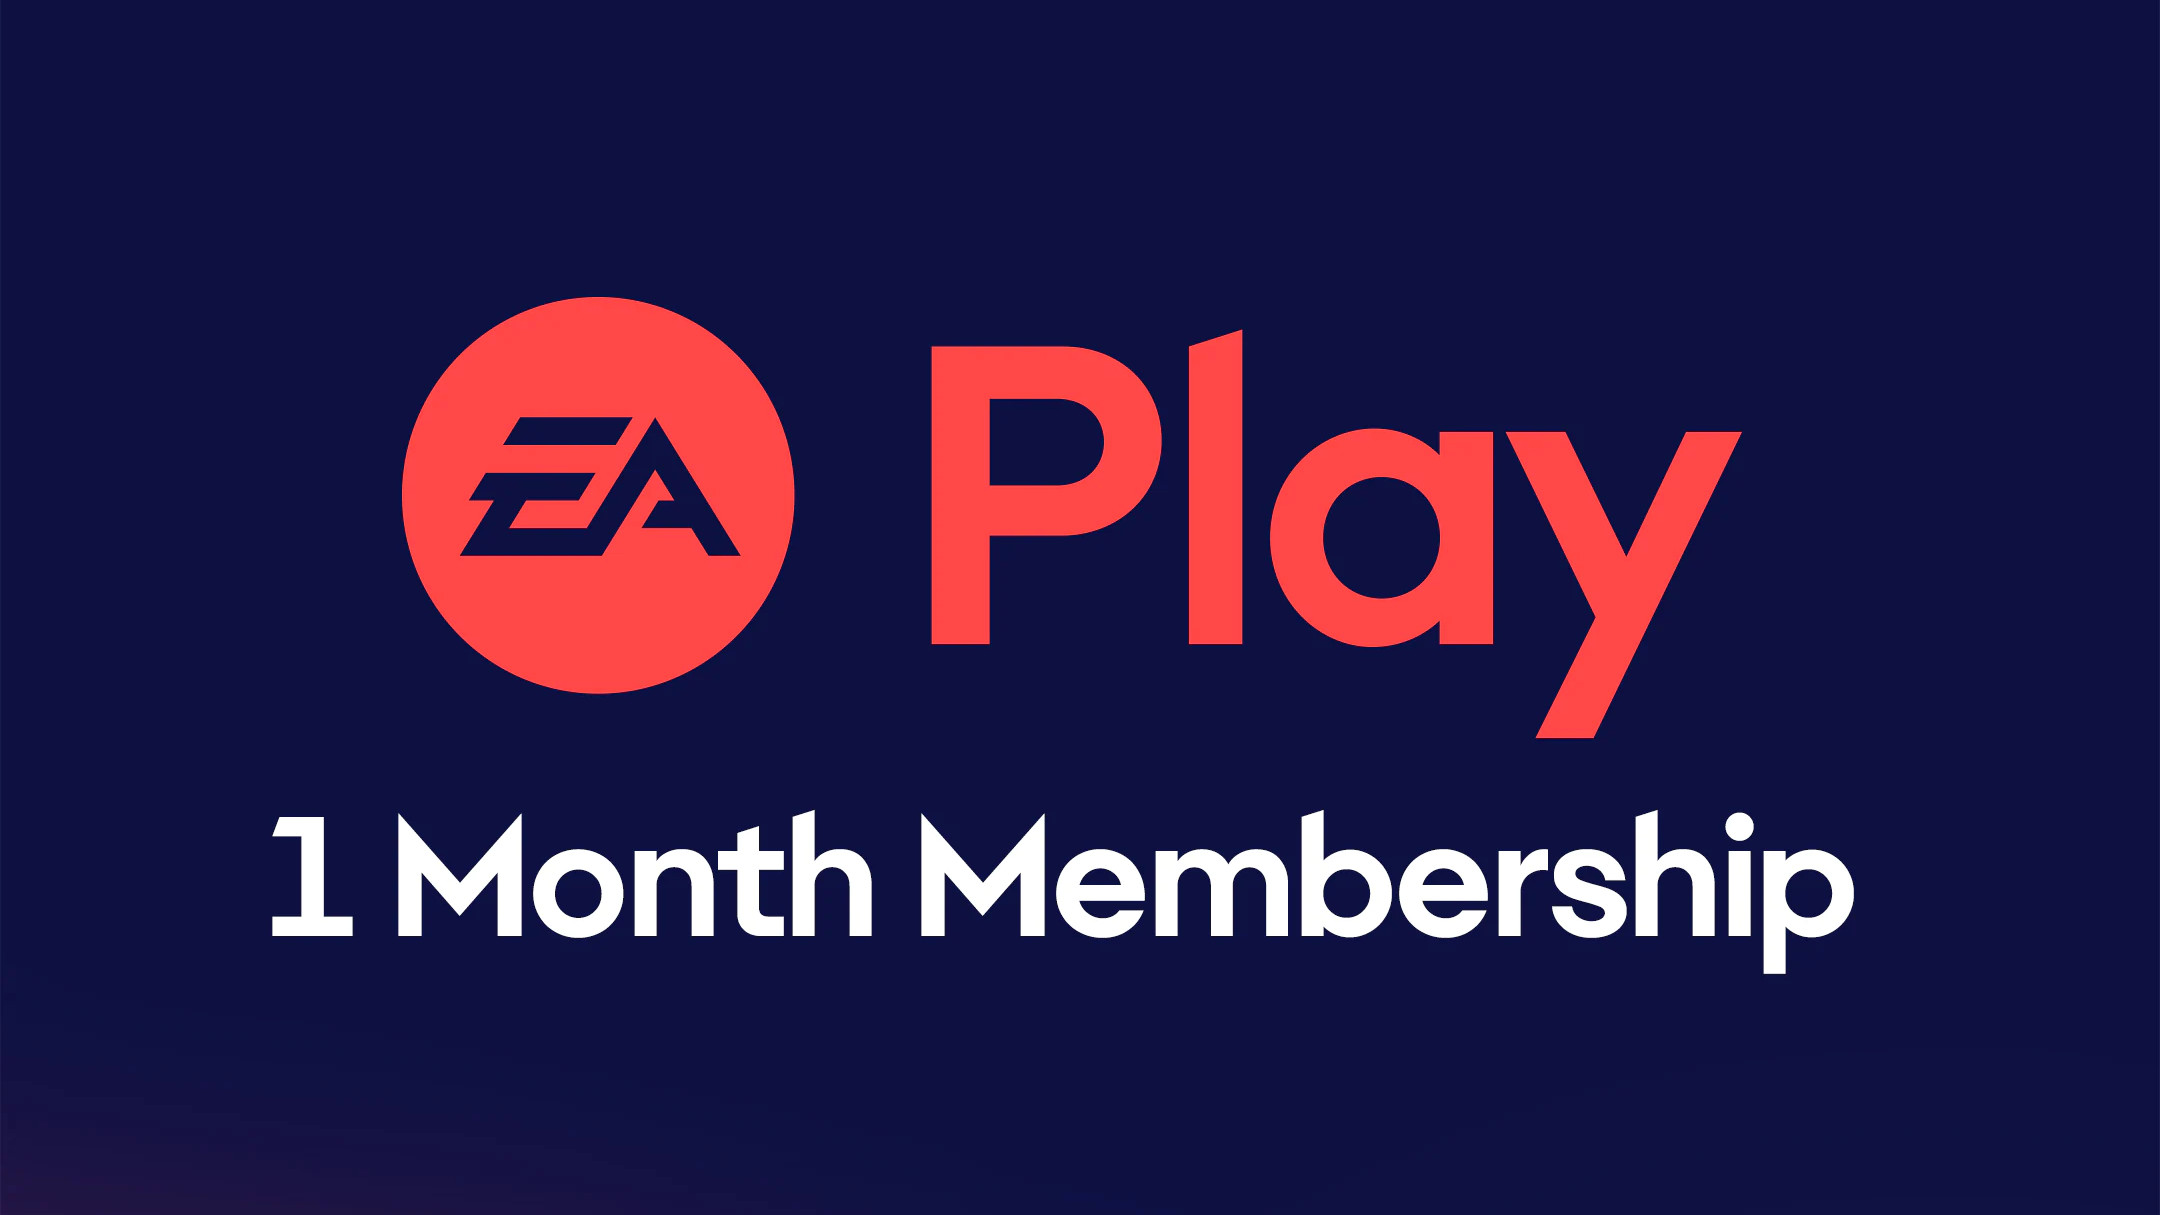 EA Play - 1 Month Subscription Key, 20.31$